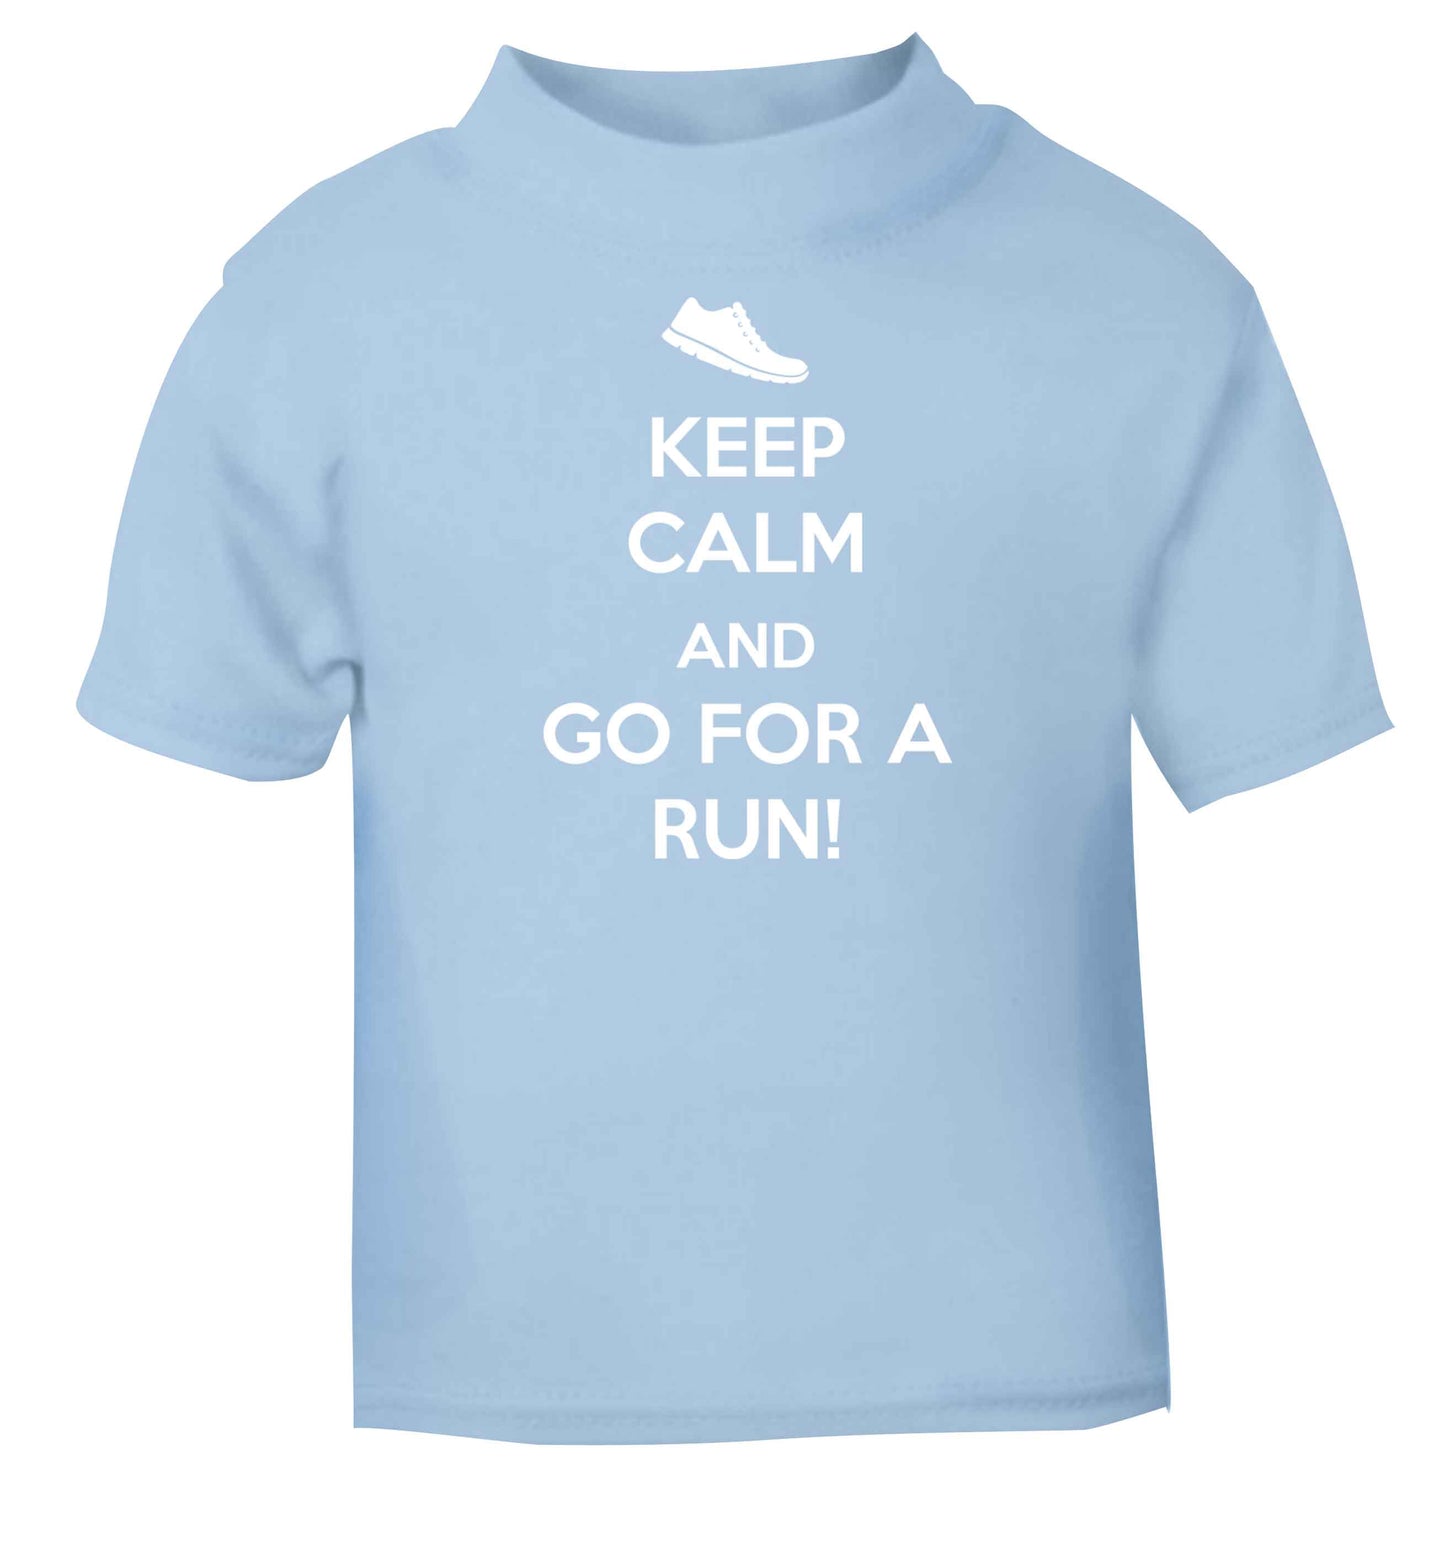 Keep calm and go for a run light blue baby toddler Tshirt 2 Years